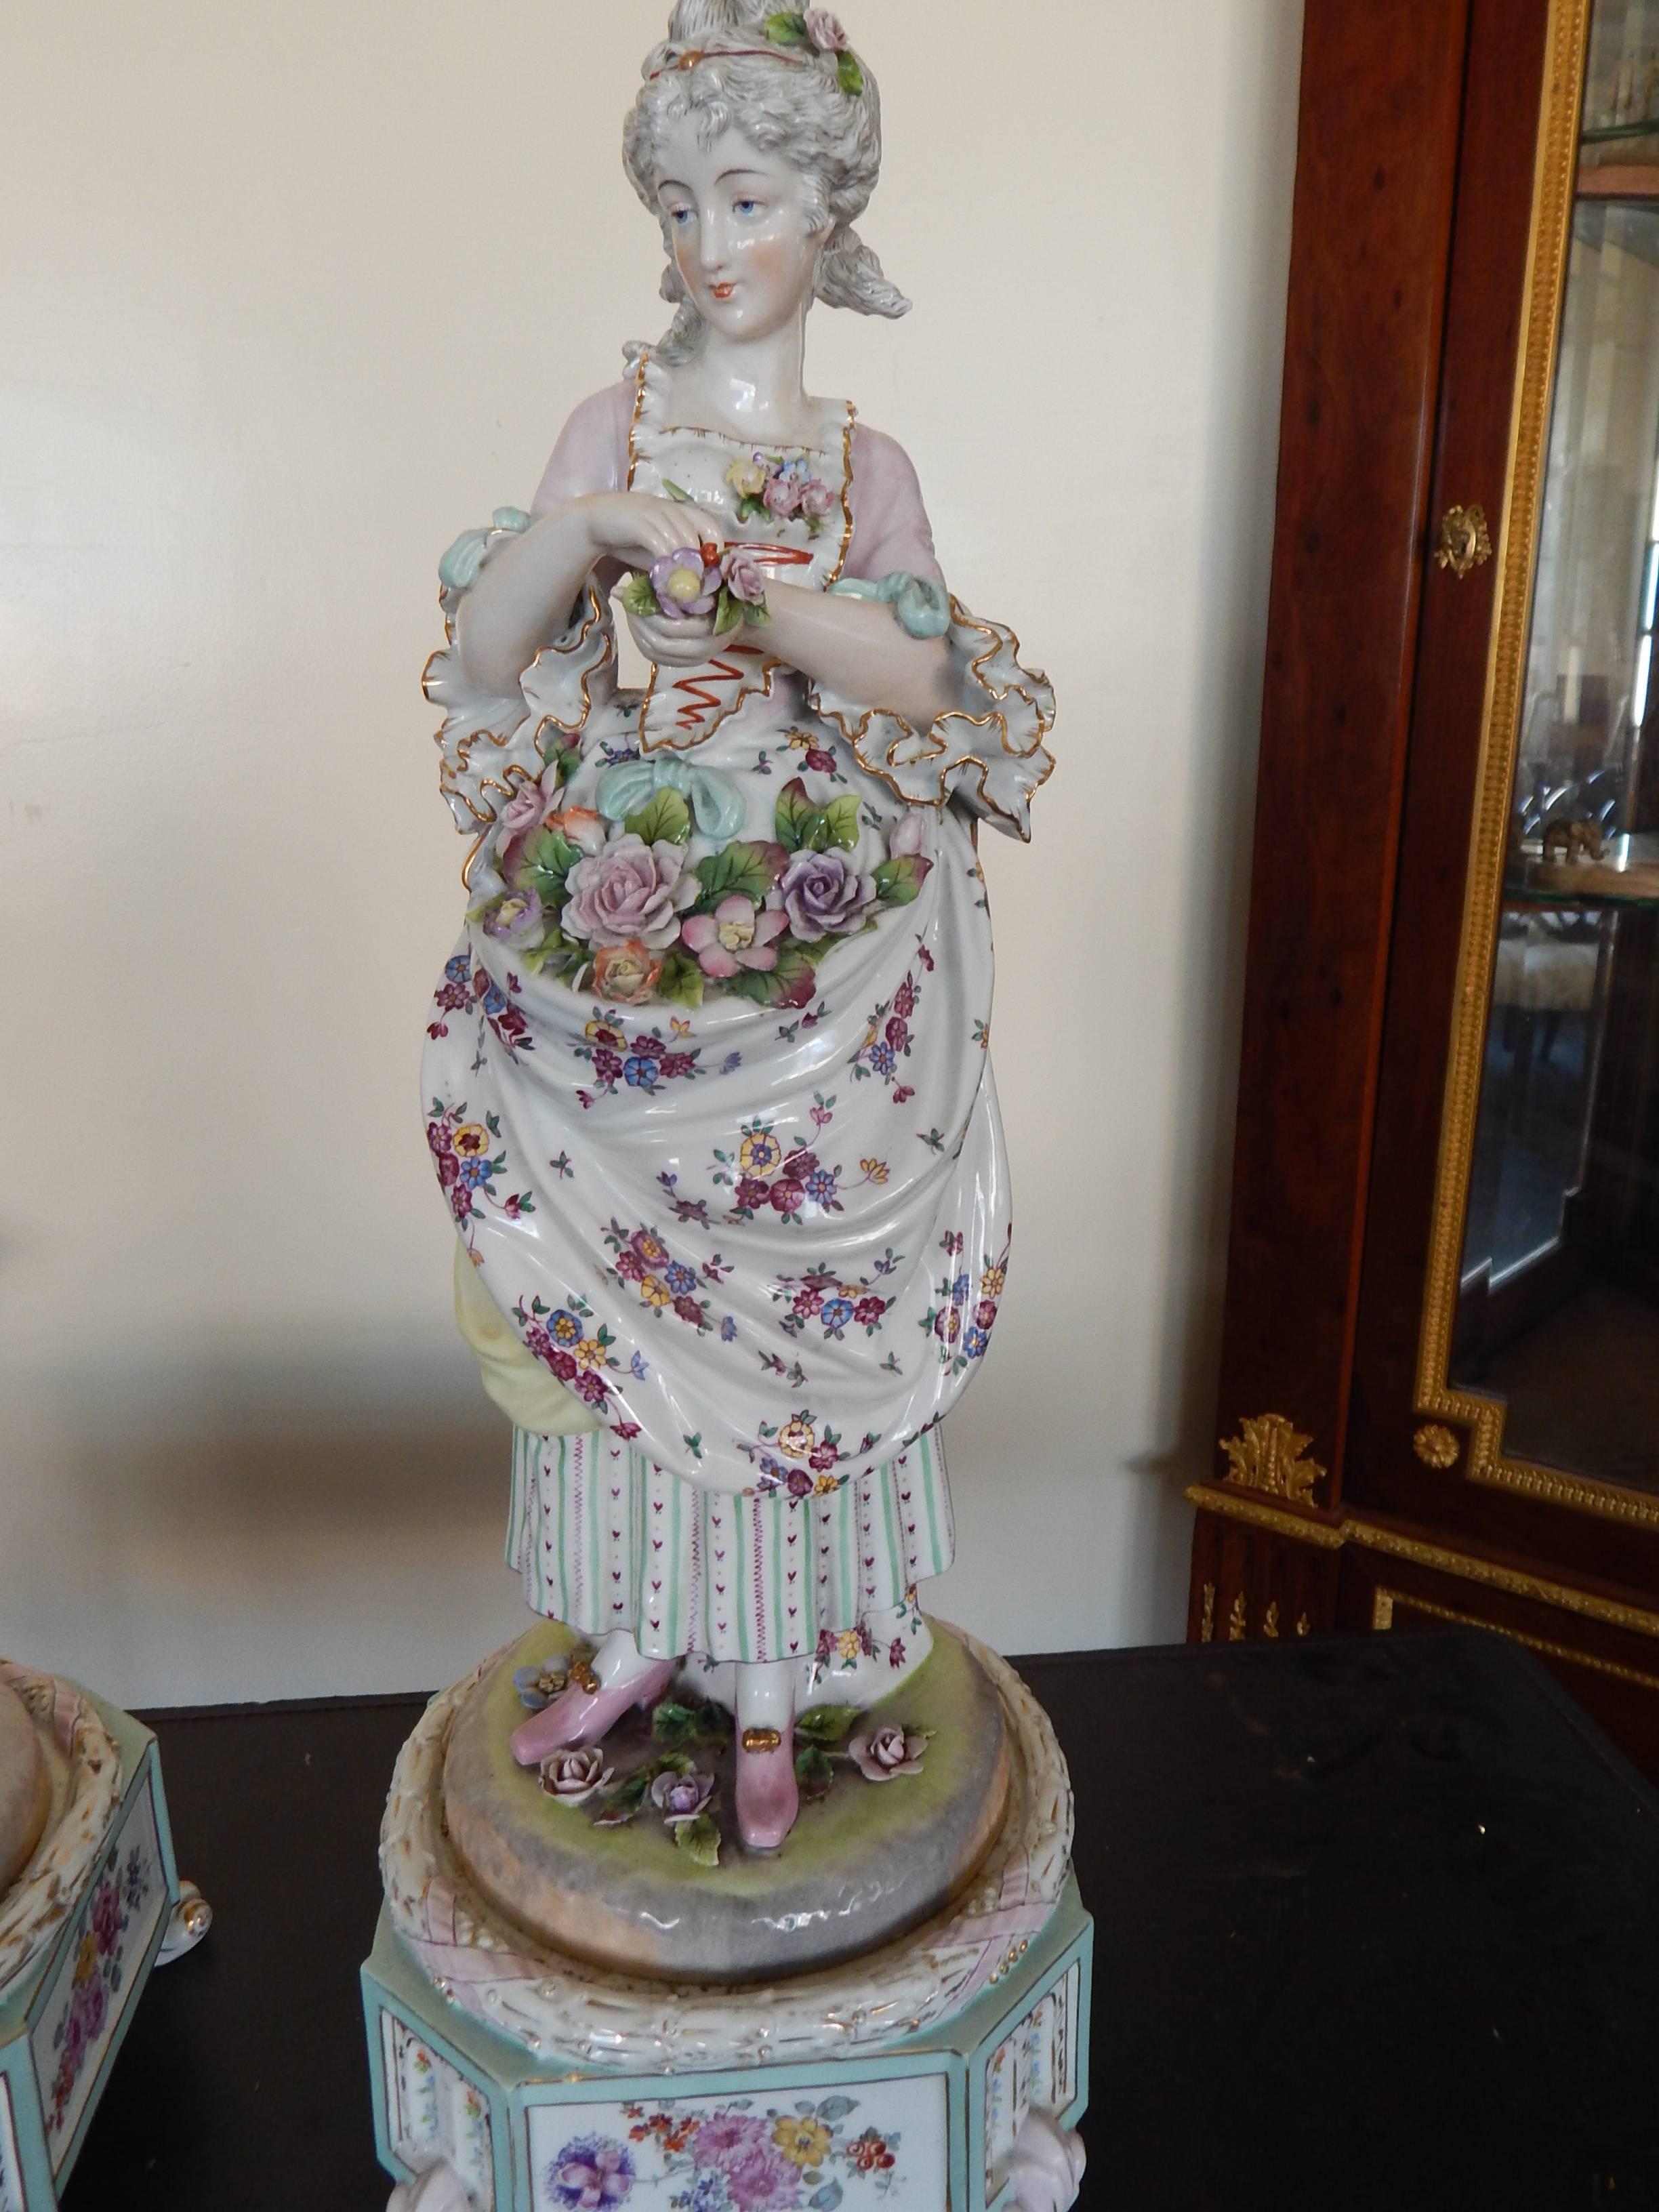 A large and impressive pair of hand-painted porcelain figures on plinths of a man and woman if formal 18th century attire.
Likely German, with painted numbers on the bottom.
These were once lamps, so there is a hole in the back of each.
There is